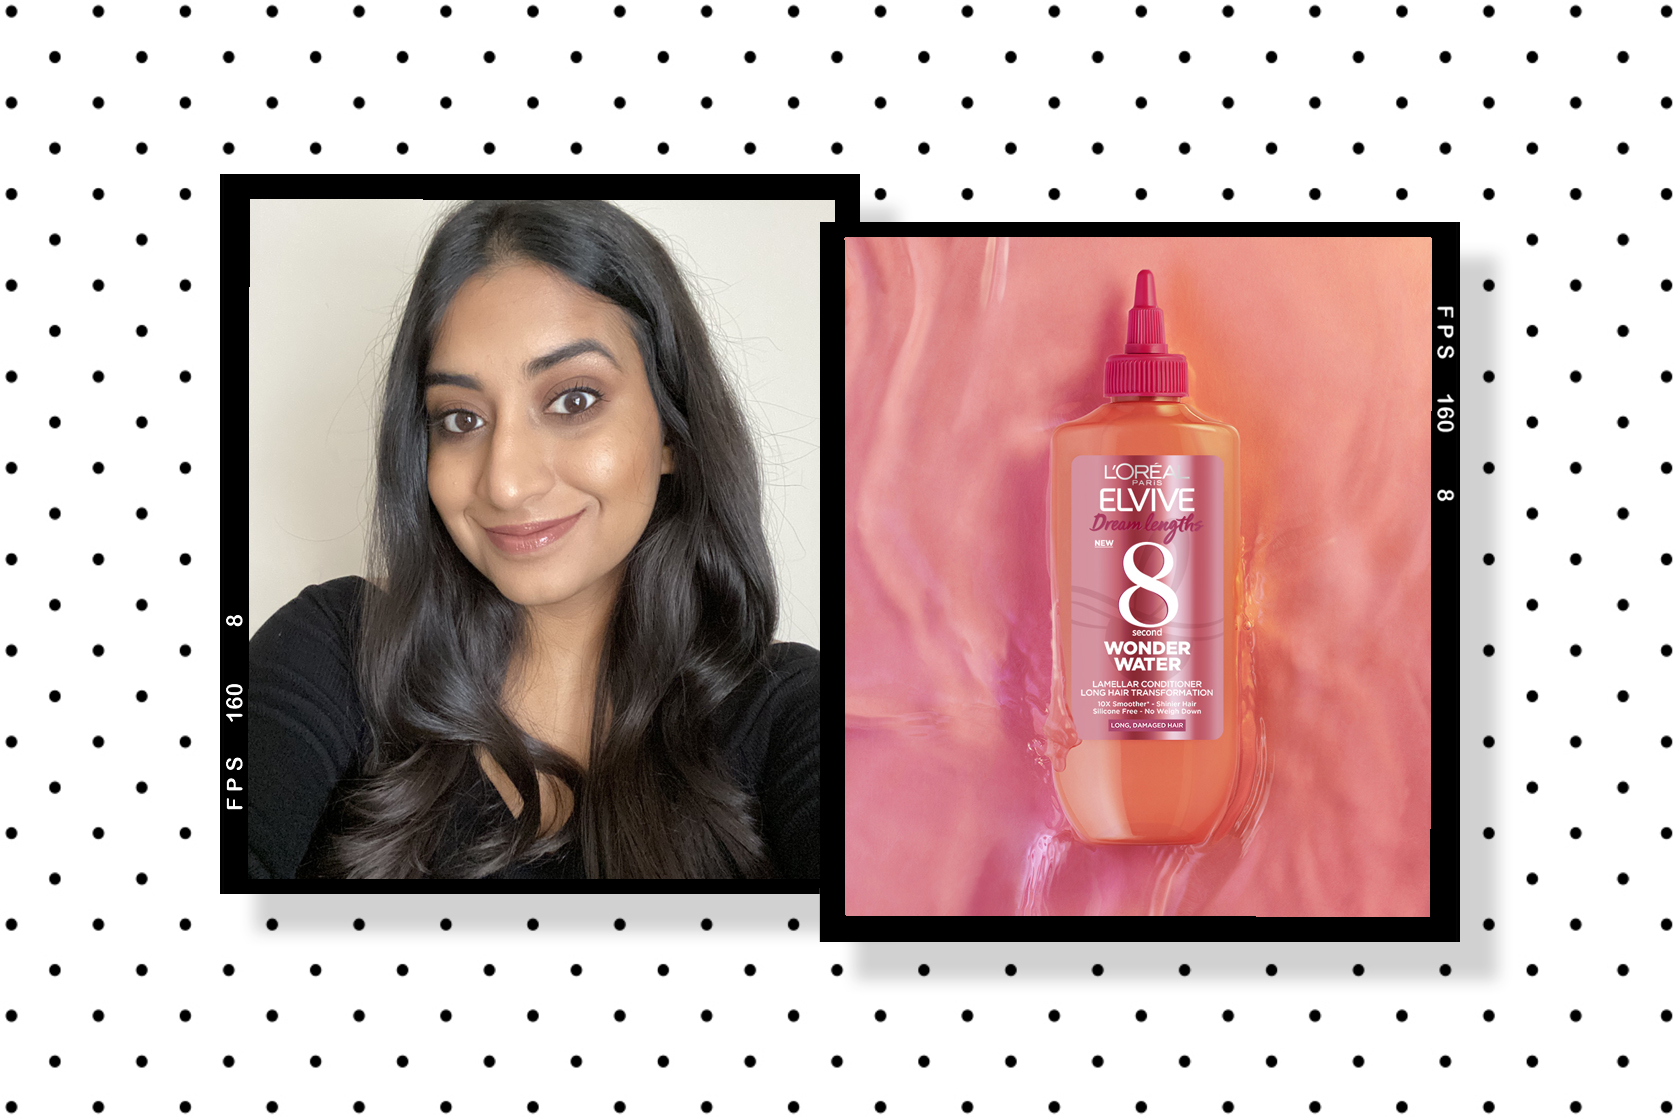 L'Oréal Elvive 8 Second Wonder Water review: is it any good?